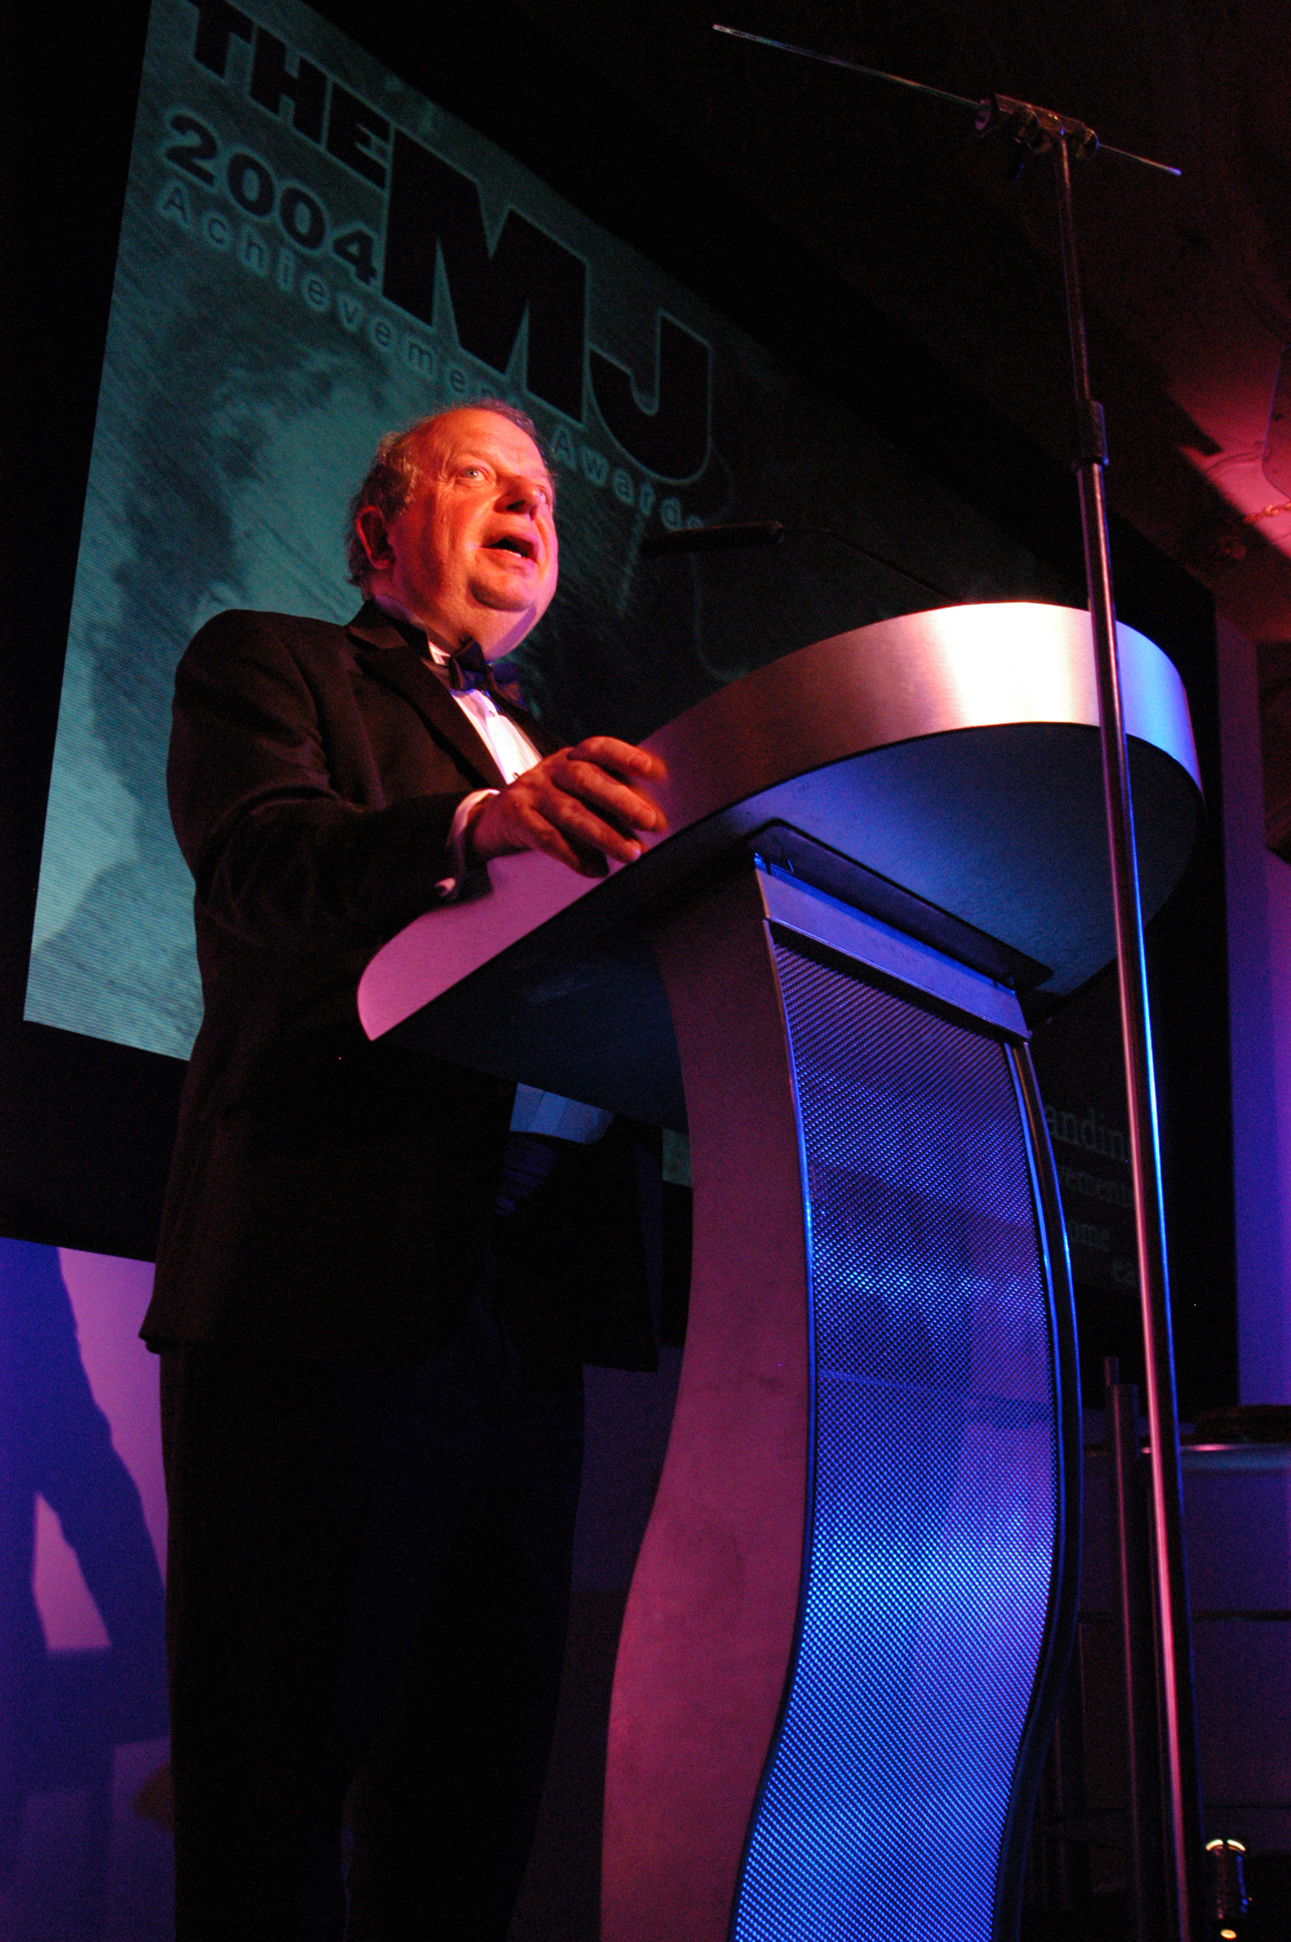 John Sergeant will take centre stage on Saturday as the festival draws to a close.